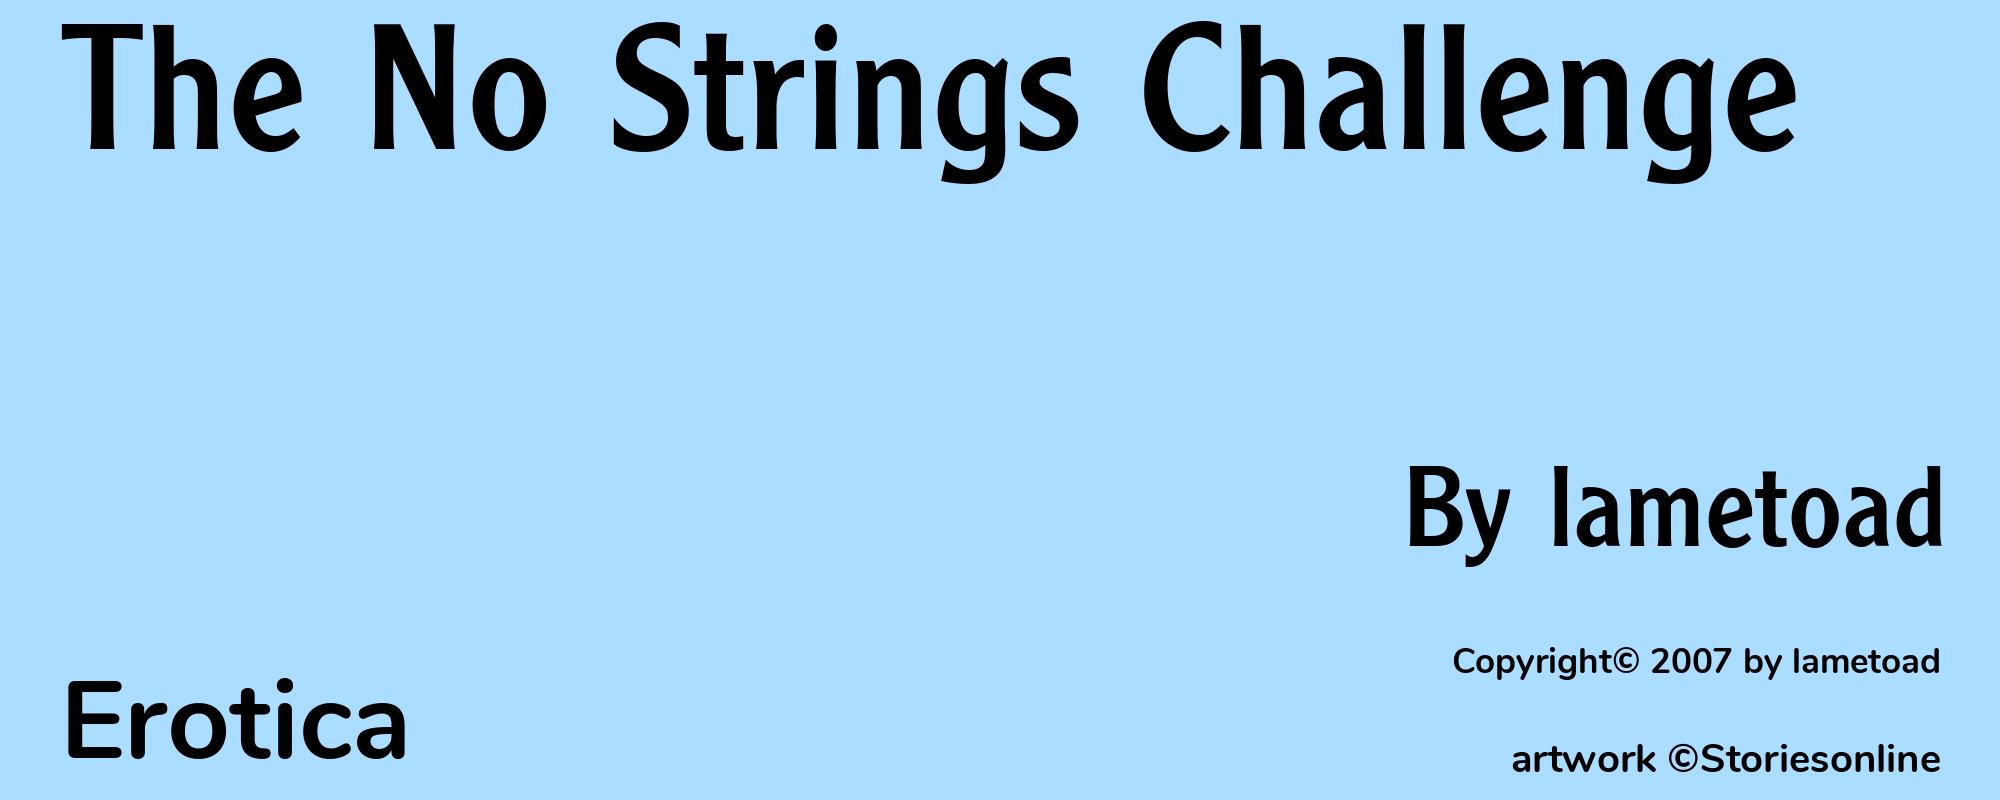 The No Strings Challenge - Cover